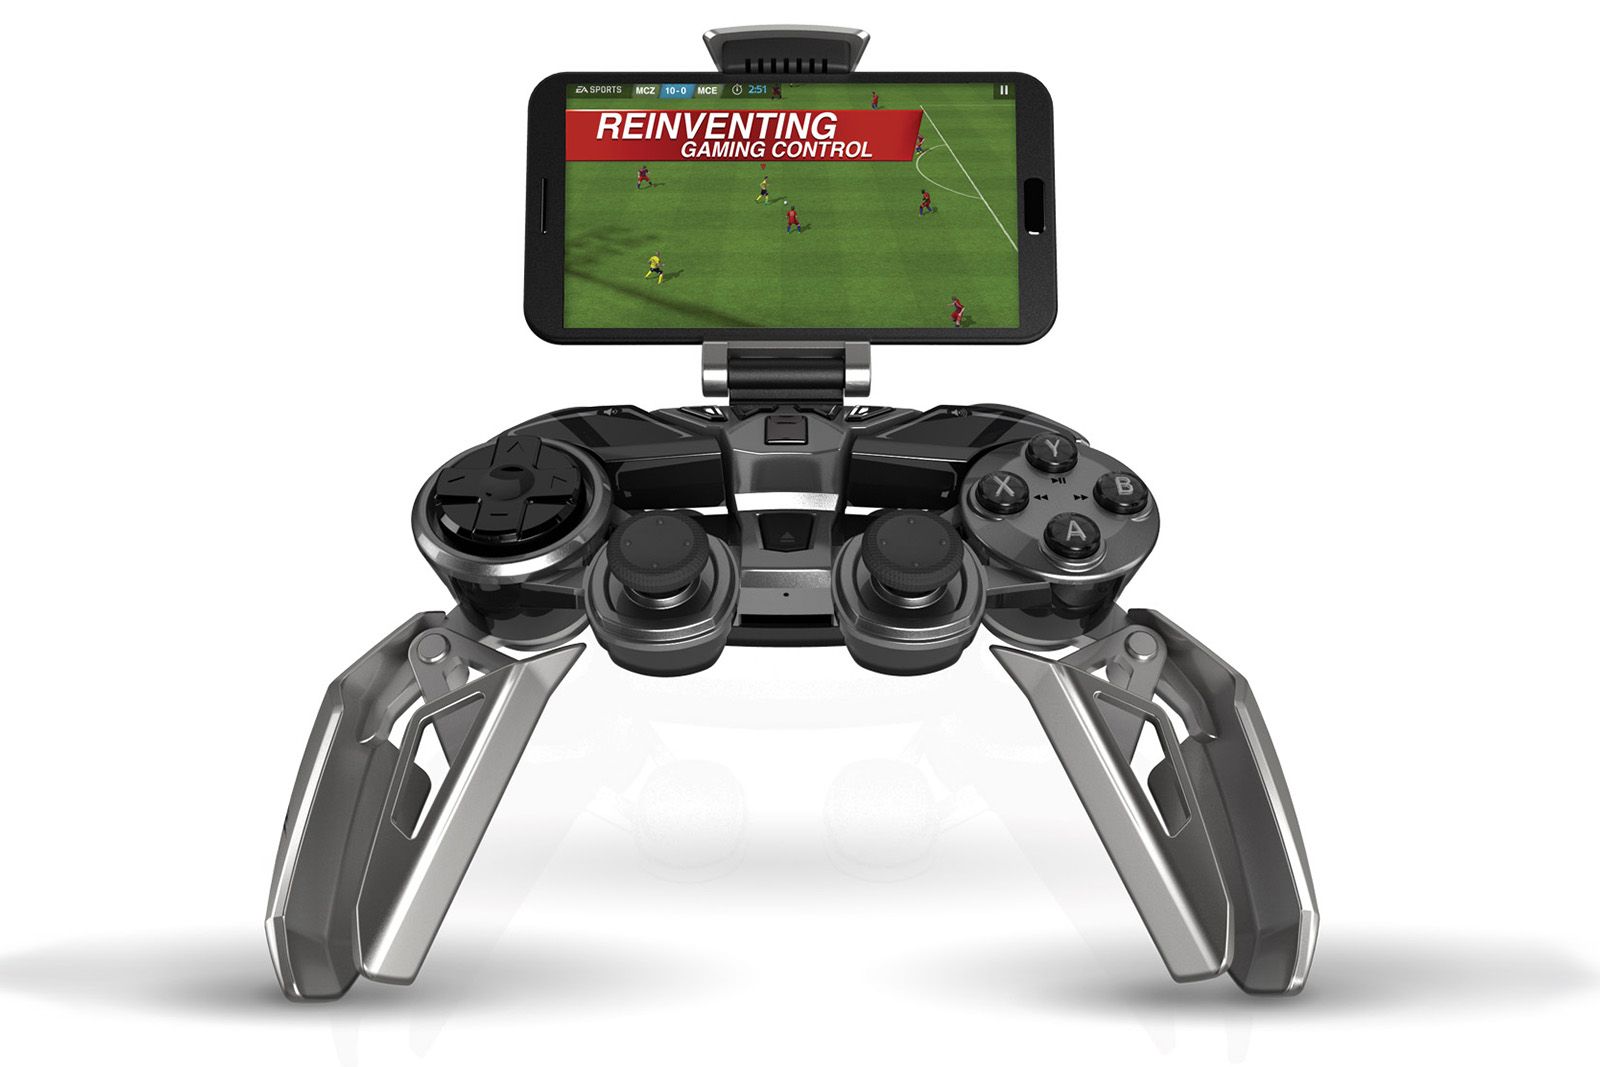 mad catz l y n x 9 is the swiss army knife of gaming for android and pc image 1